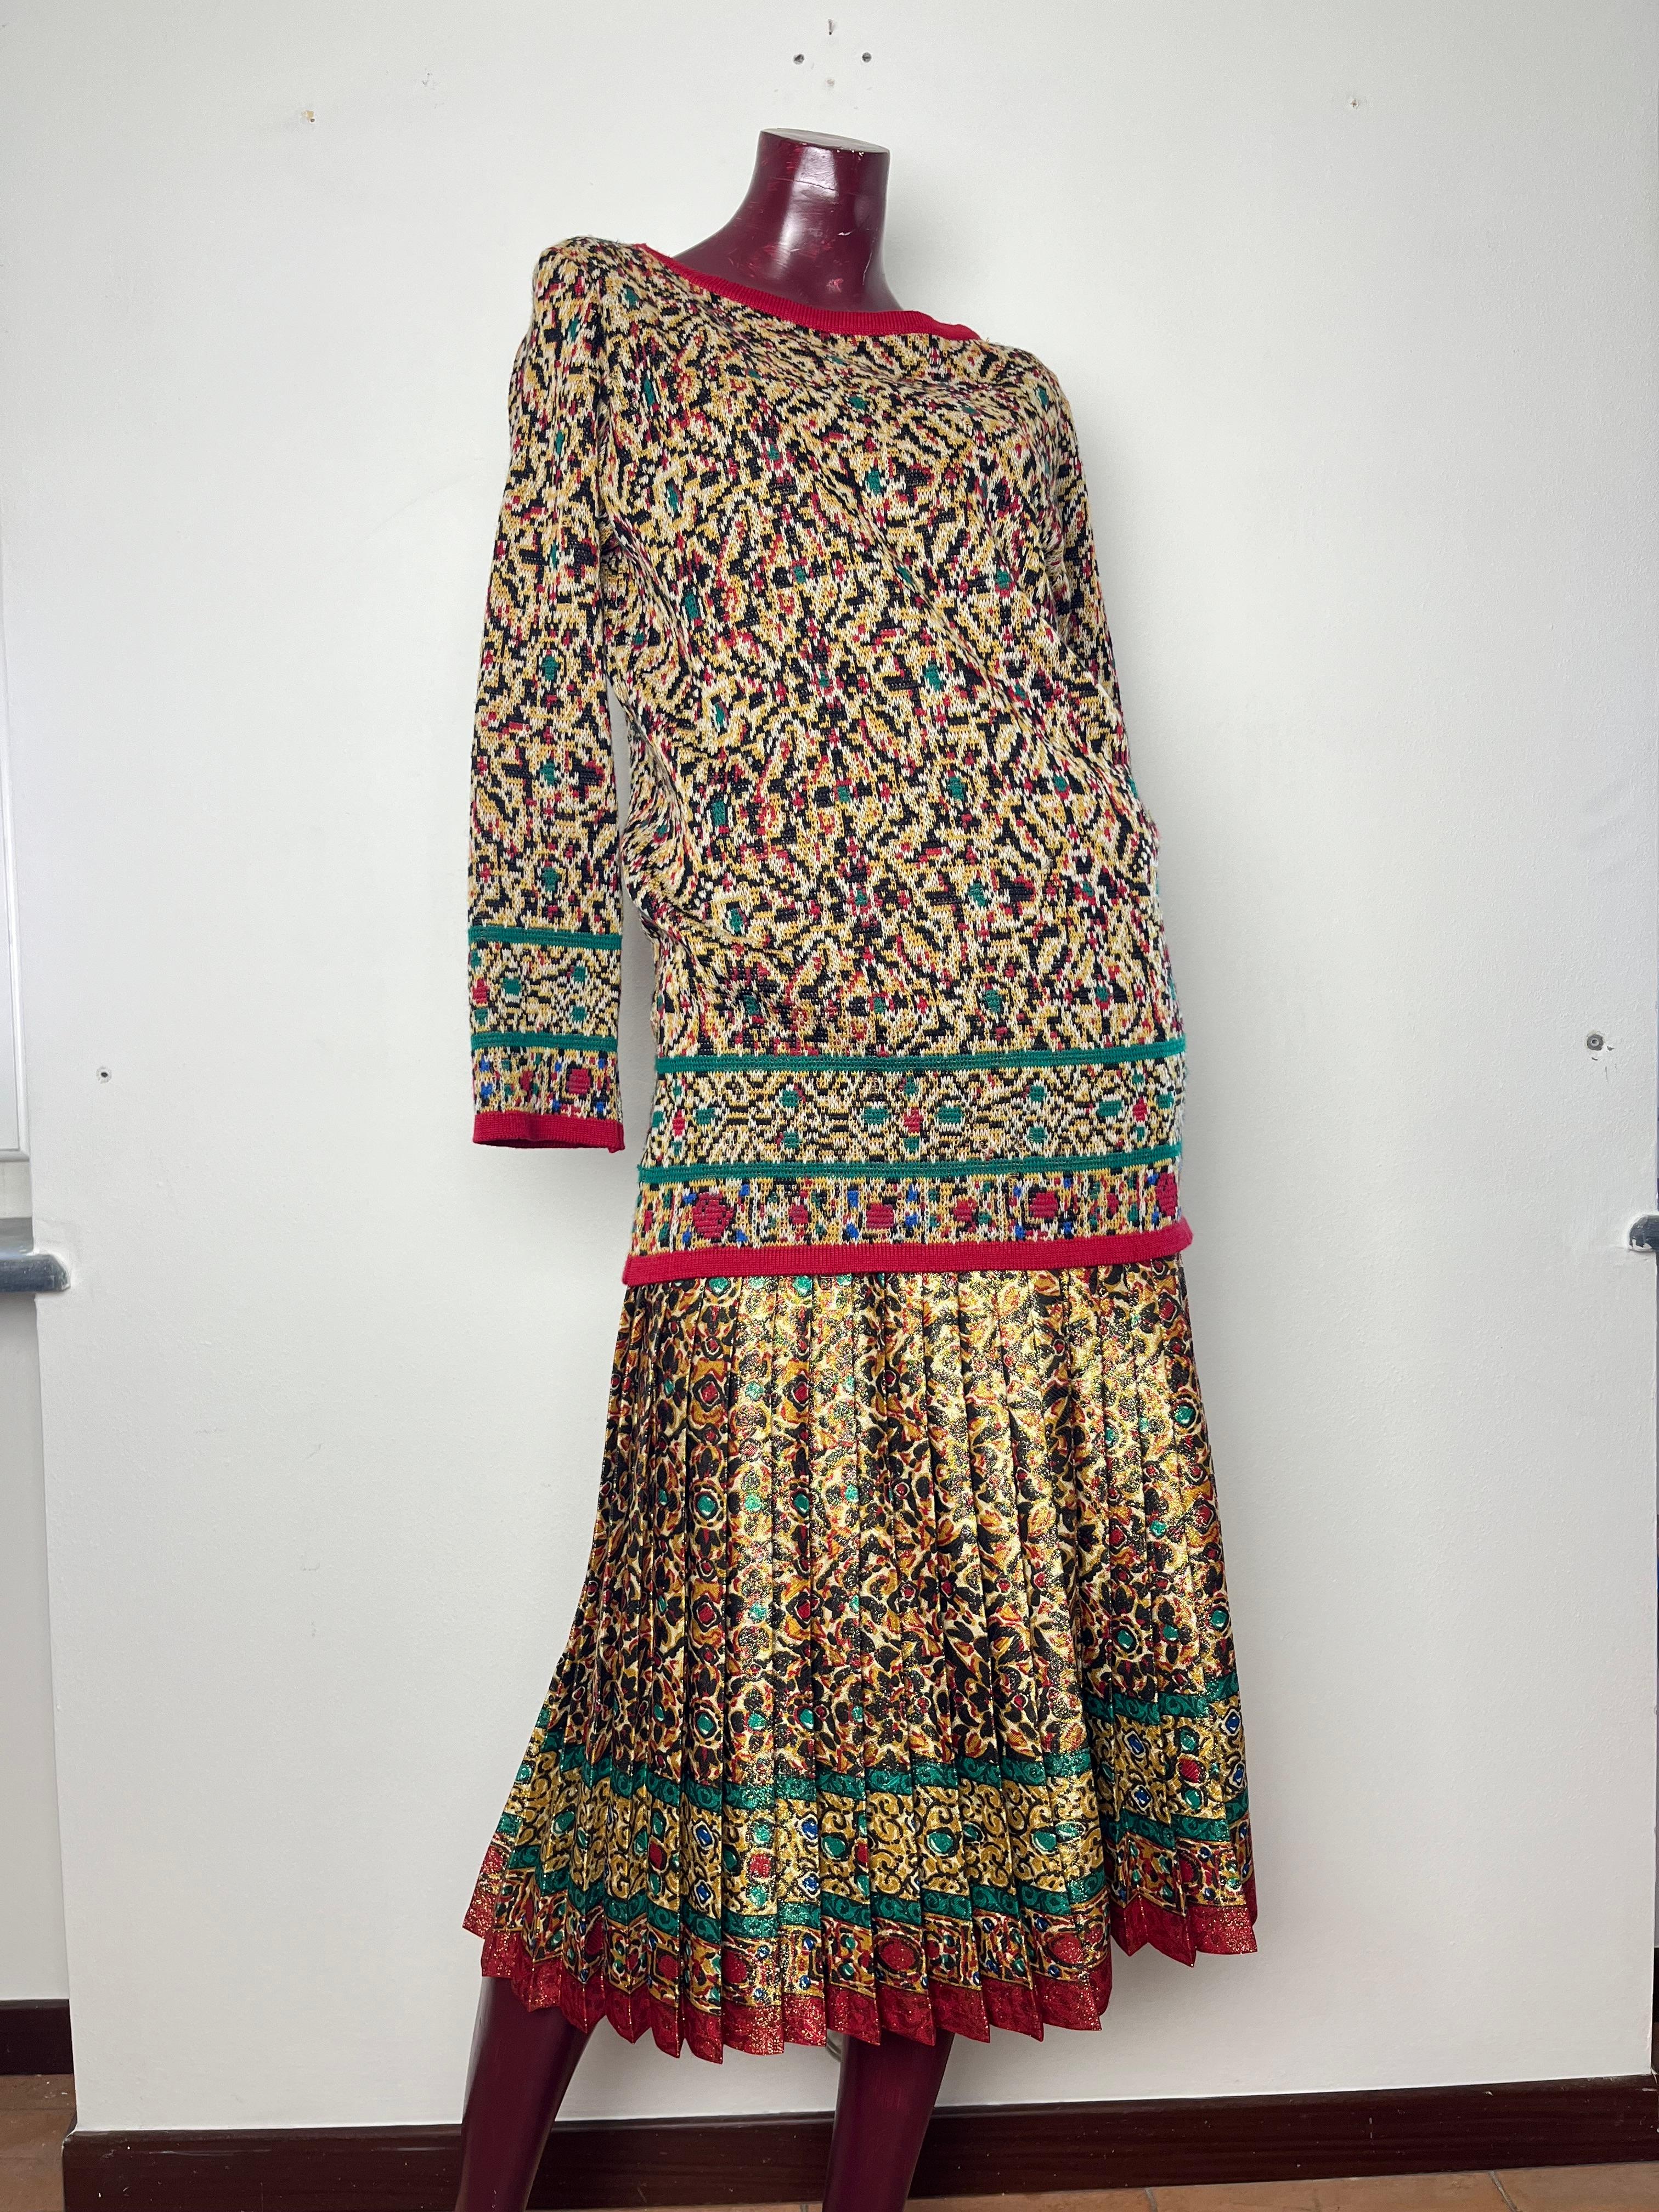 Pleated skirt with floral print 1984 collection  multicolored silk-blend from Yves Saint Laurent featuring a fully pleated all-over floral print, high waist and straight hem.

Yves Saint Laurent multicolor knitted wool 80s sweater with round collar